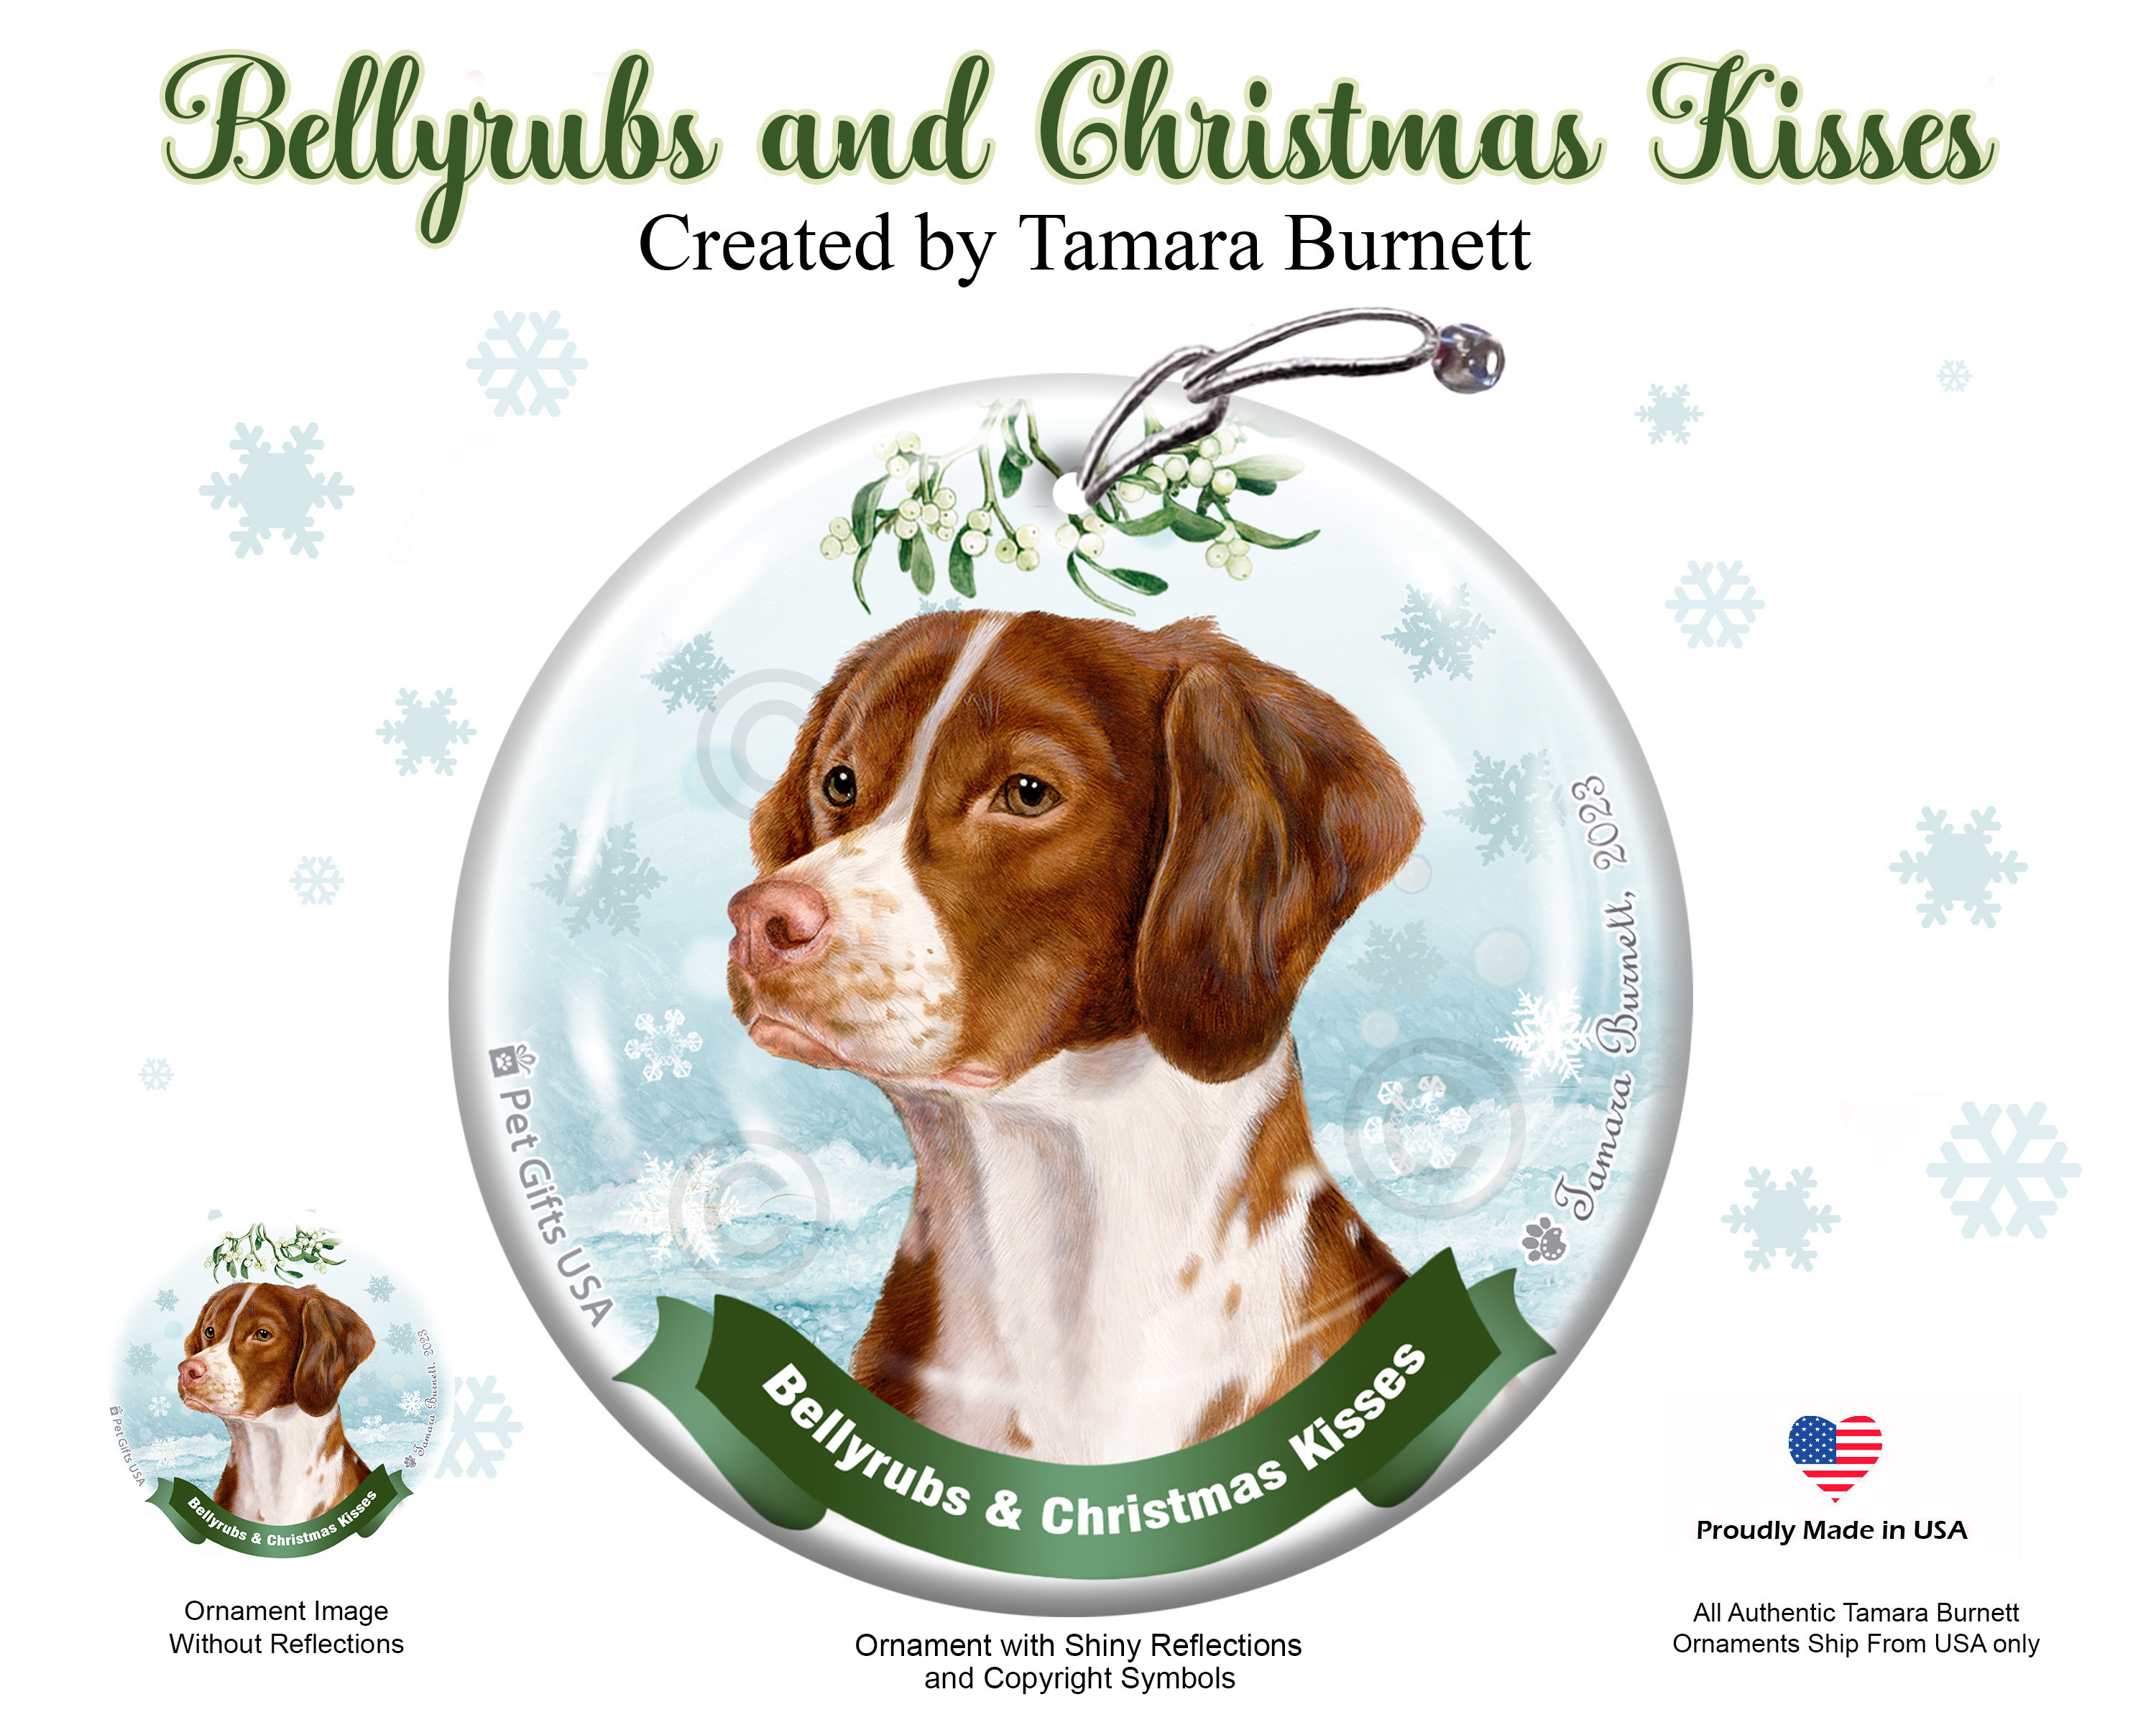 Brittany Orange and White Belly Rubs and Christmas Kisses Ornament Image